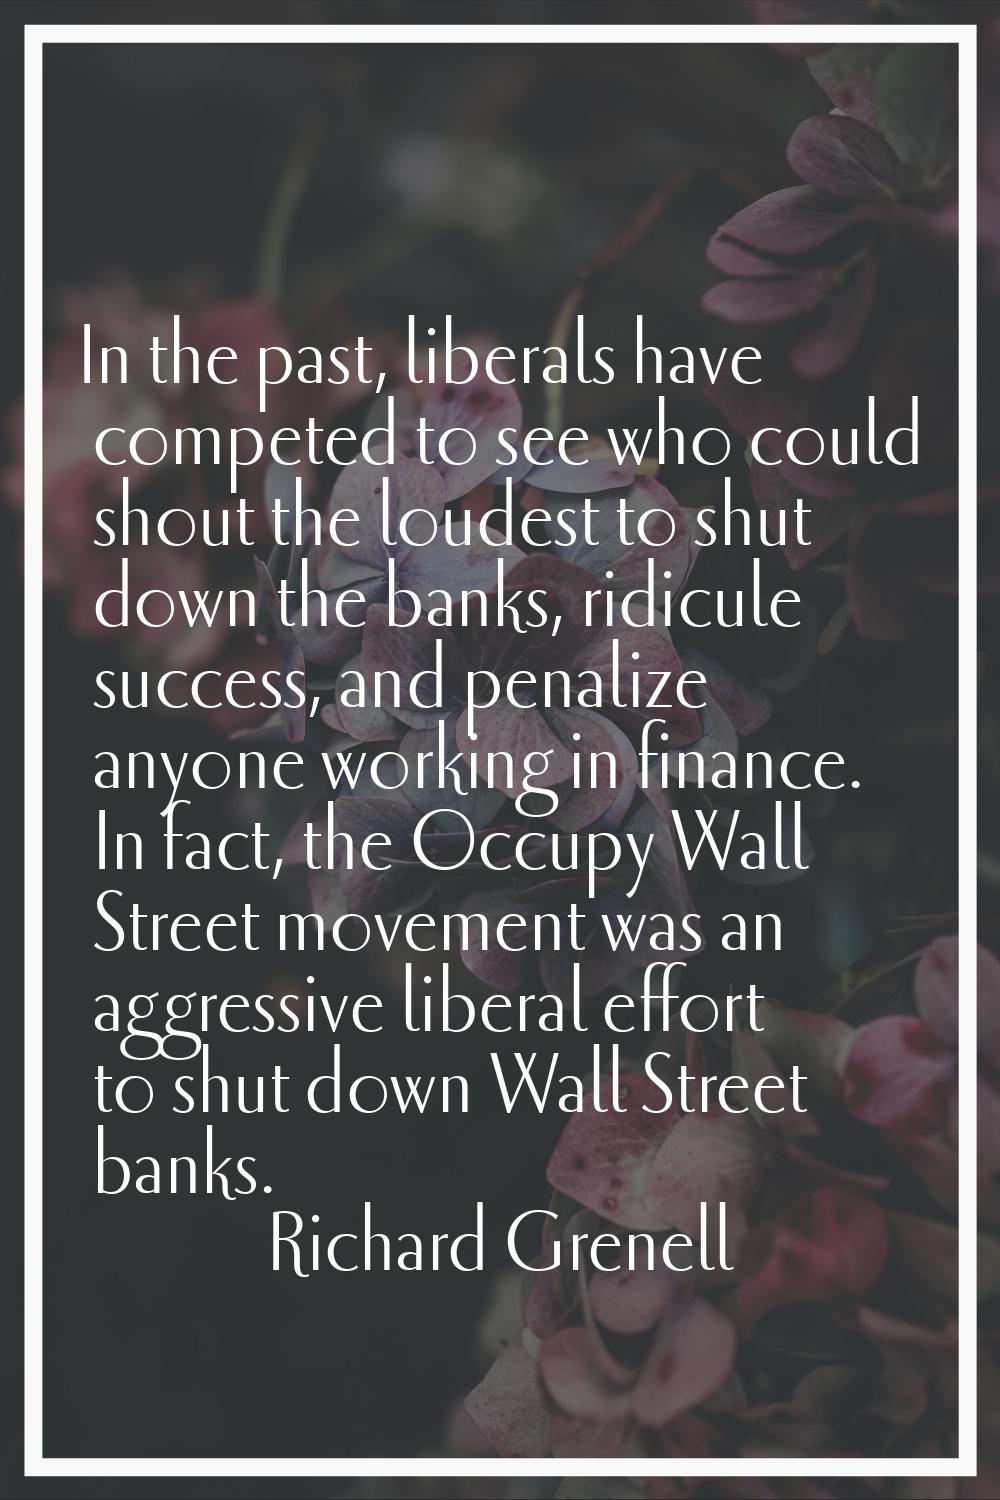 In the past, liberals have competed to see who could shout the loudest to shut down the banks, ridi